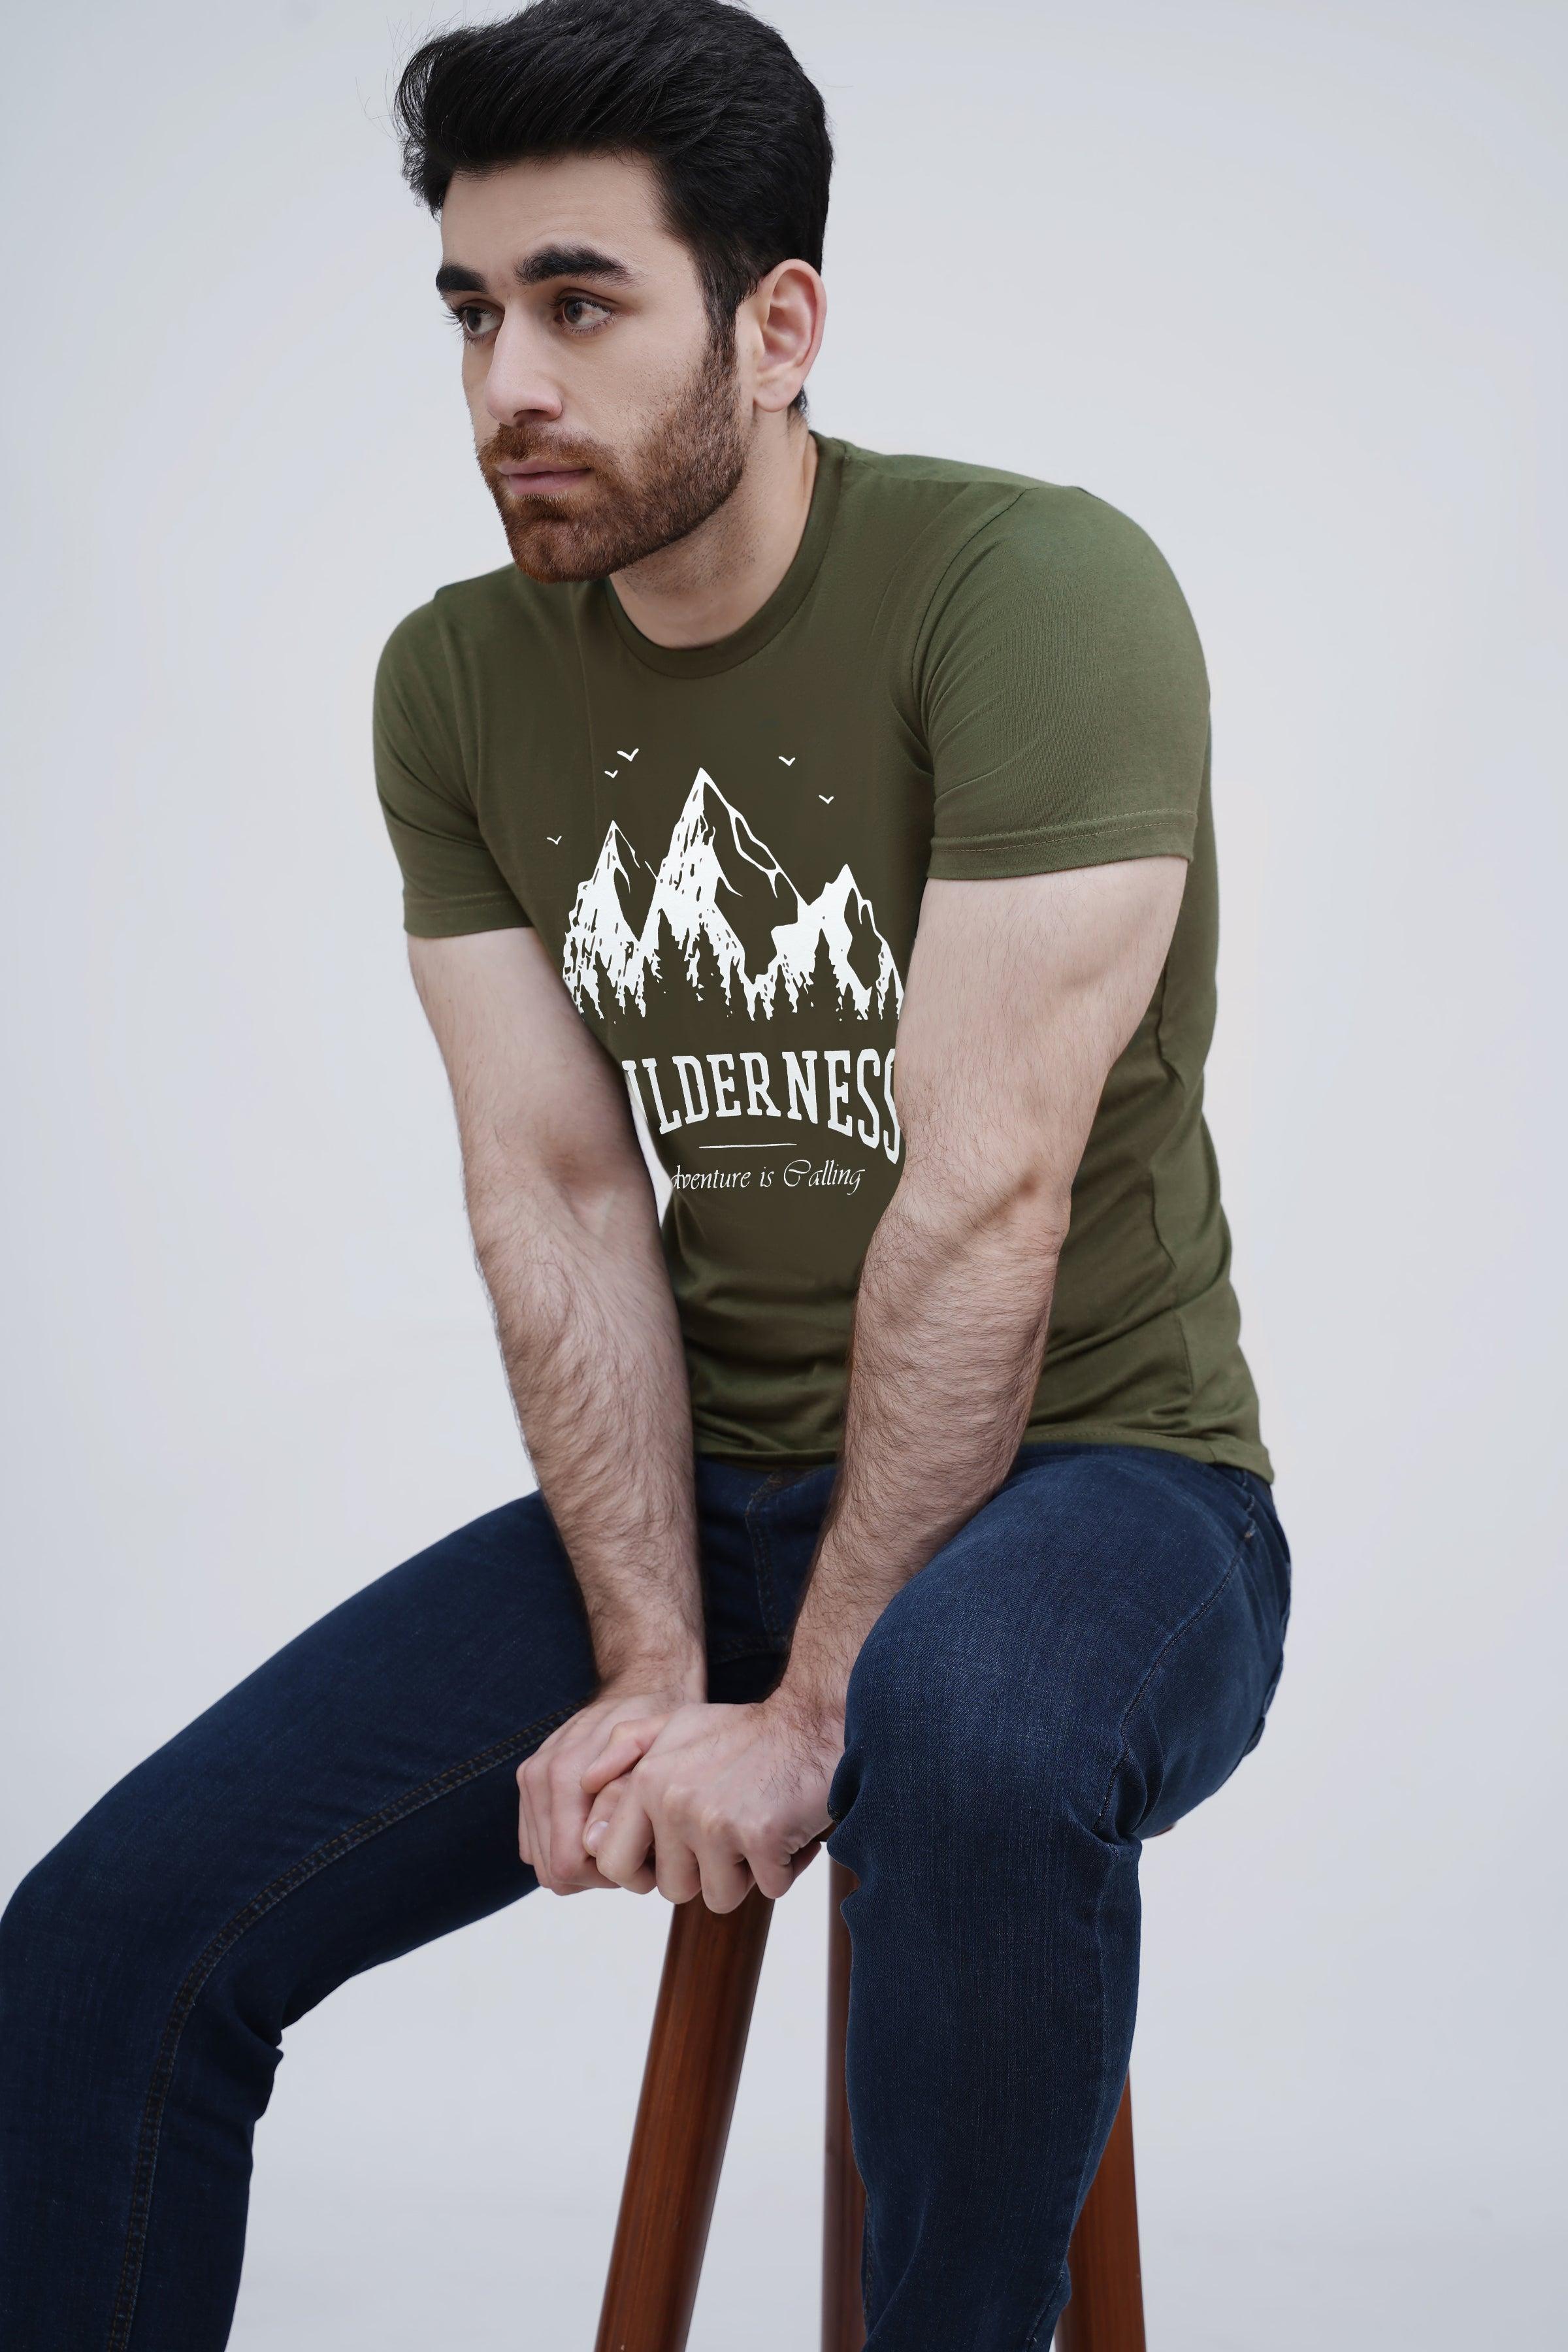 GRAPHIC T SHIRT OLIVE GREEN at Charcoal Clothing